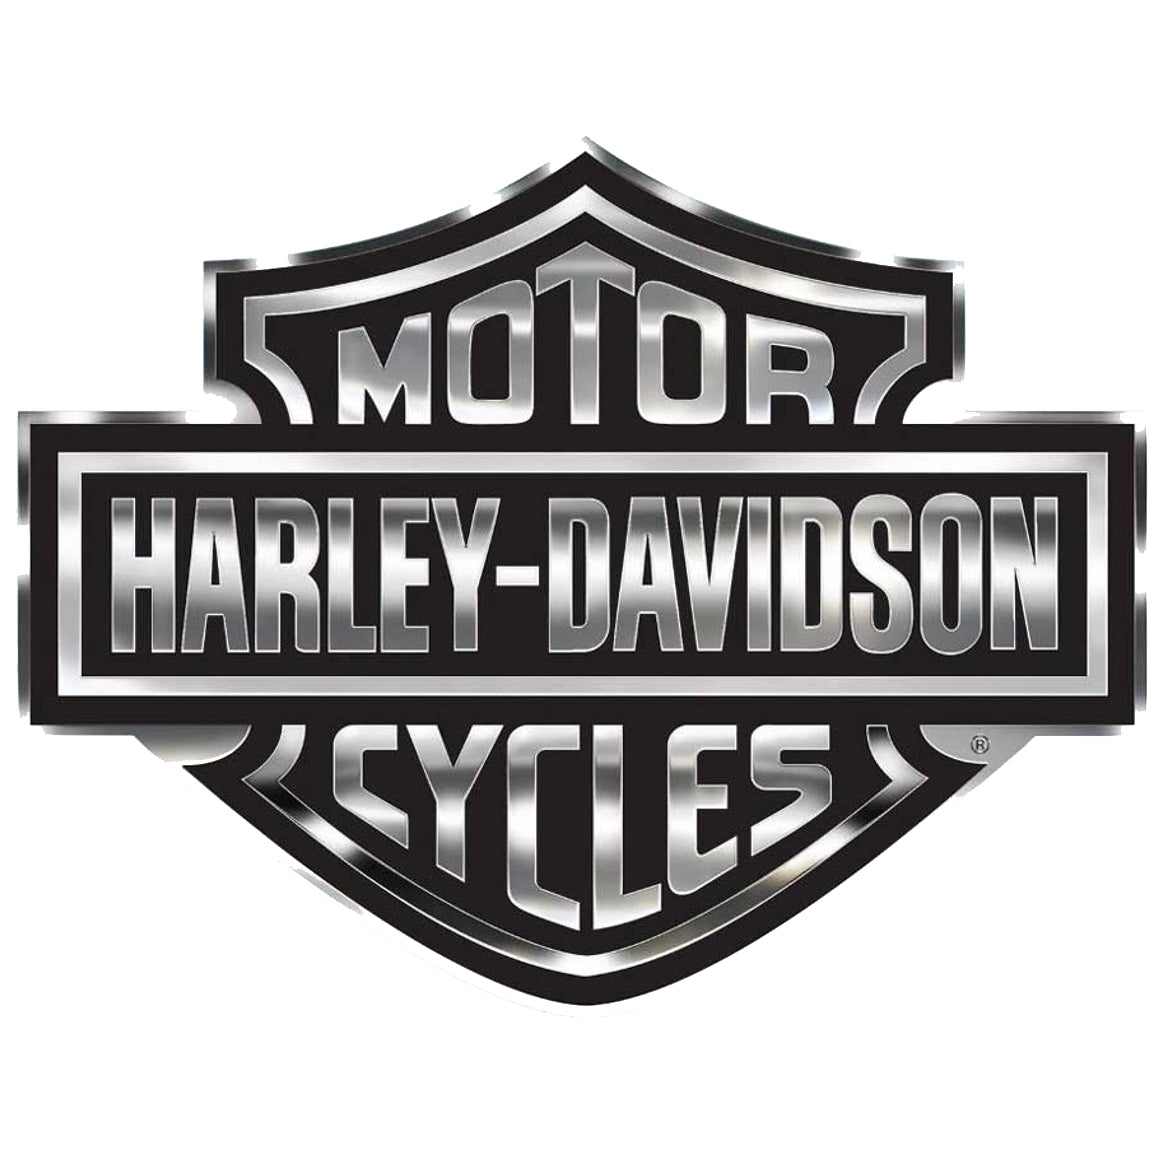 XL (extra large) Harley-Davidson Eagle Logo Vinyl Decal Sticker Different  colors & size for Cars/Bikes/Windows